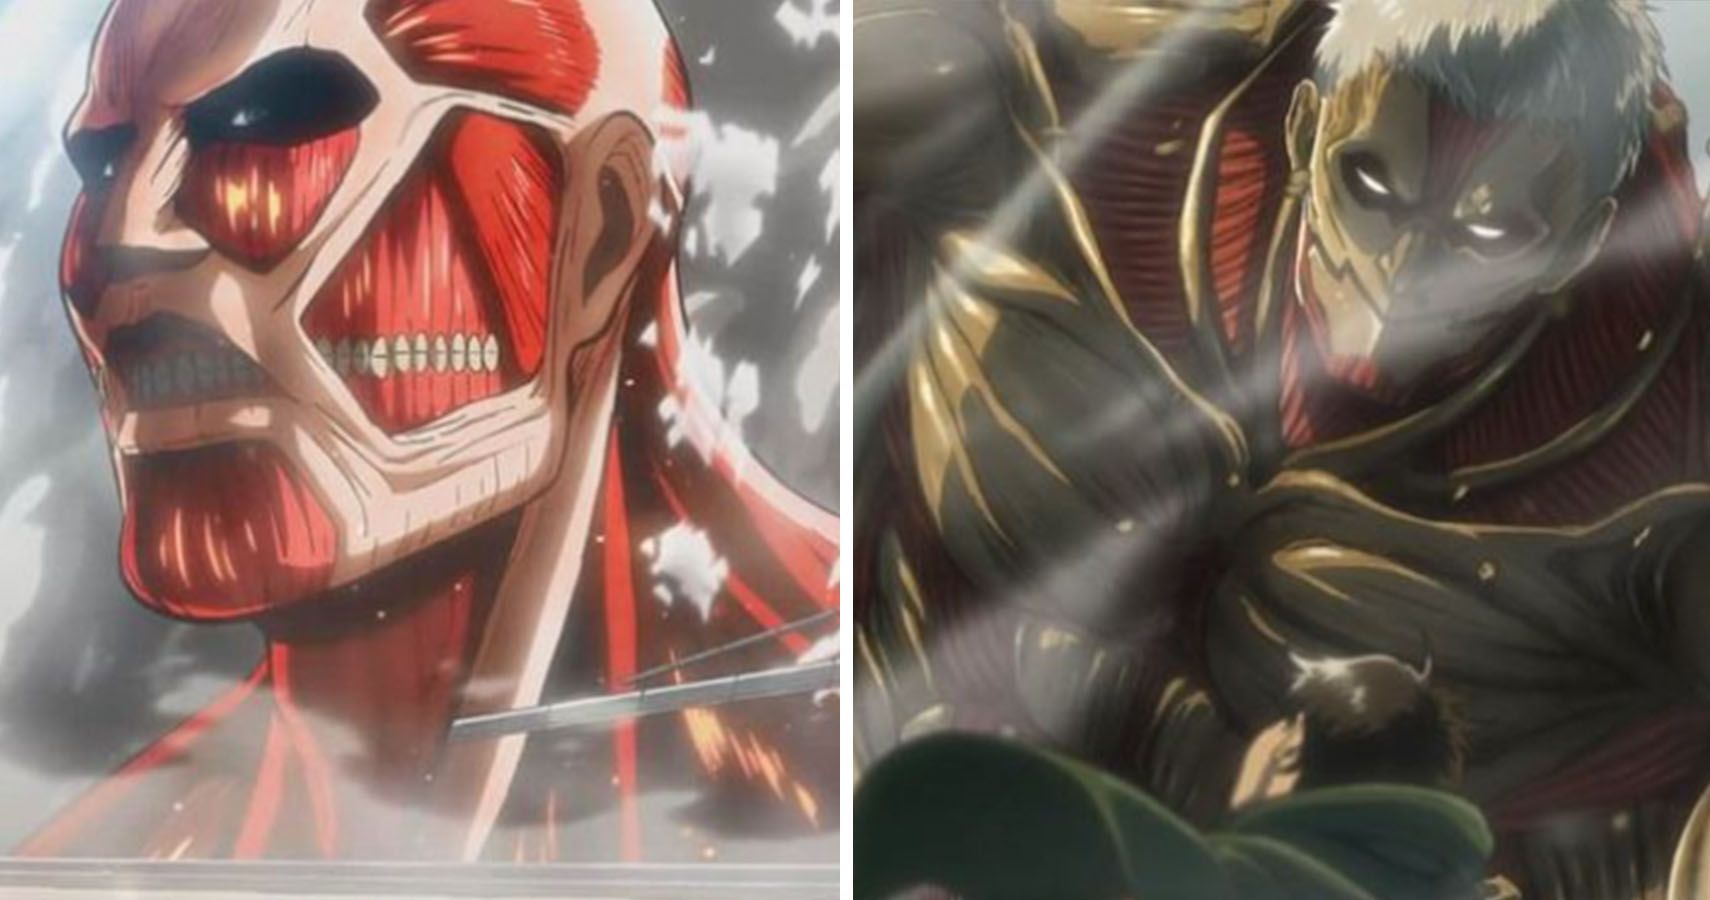 Attack On Titan The 9 Titans Ranked From Weakest To Most Powerful Worried, christa immediately looks for ymir and finally reveals. attack on titan the 9 titans ranked